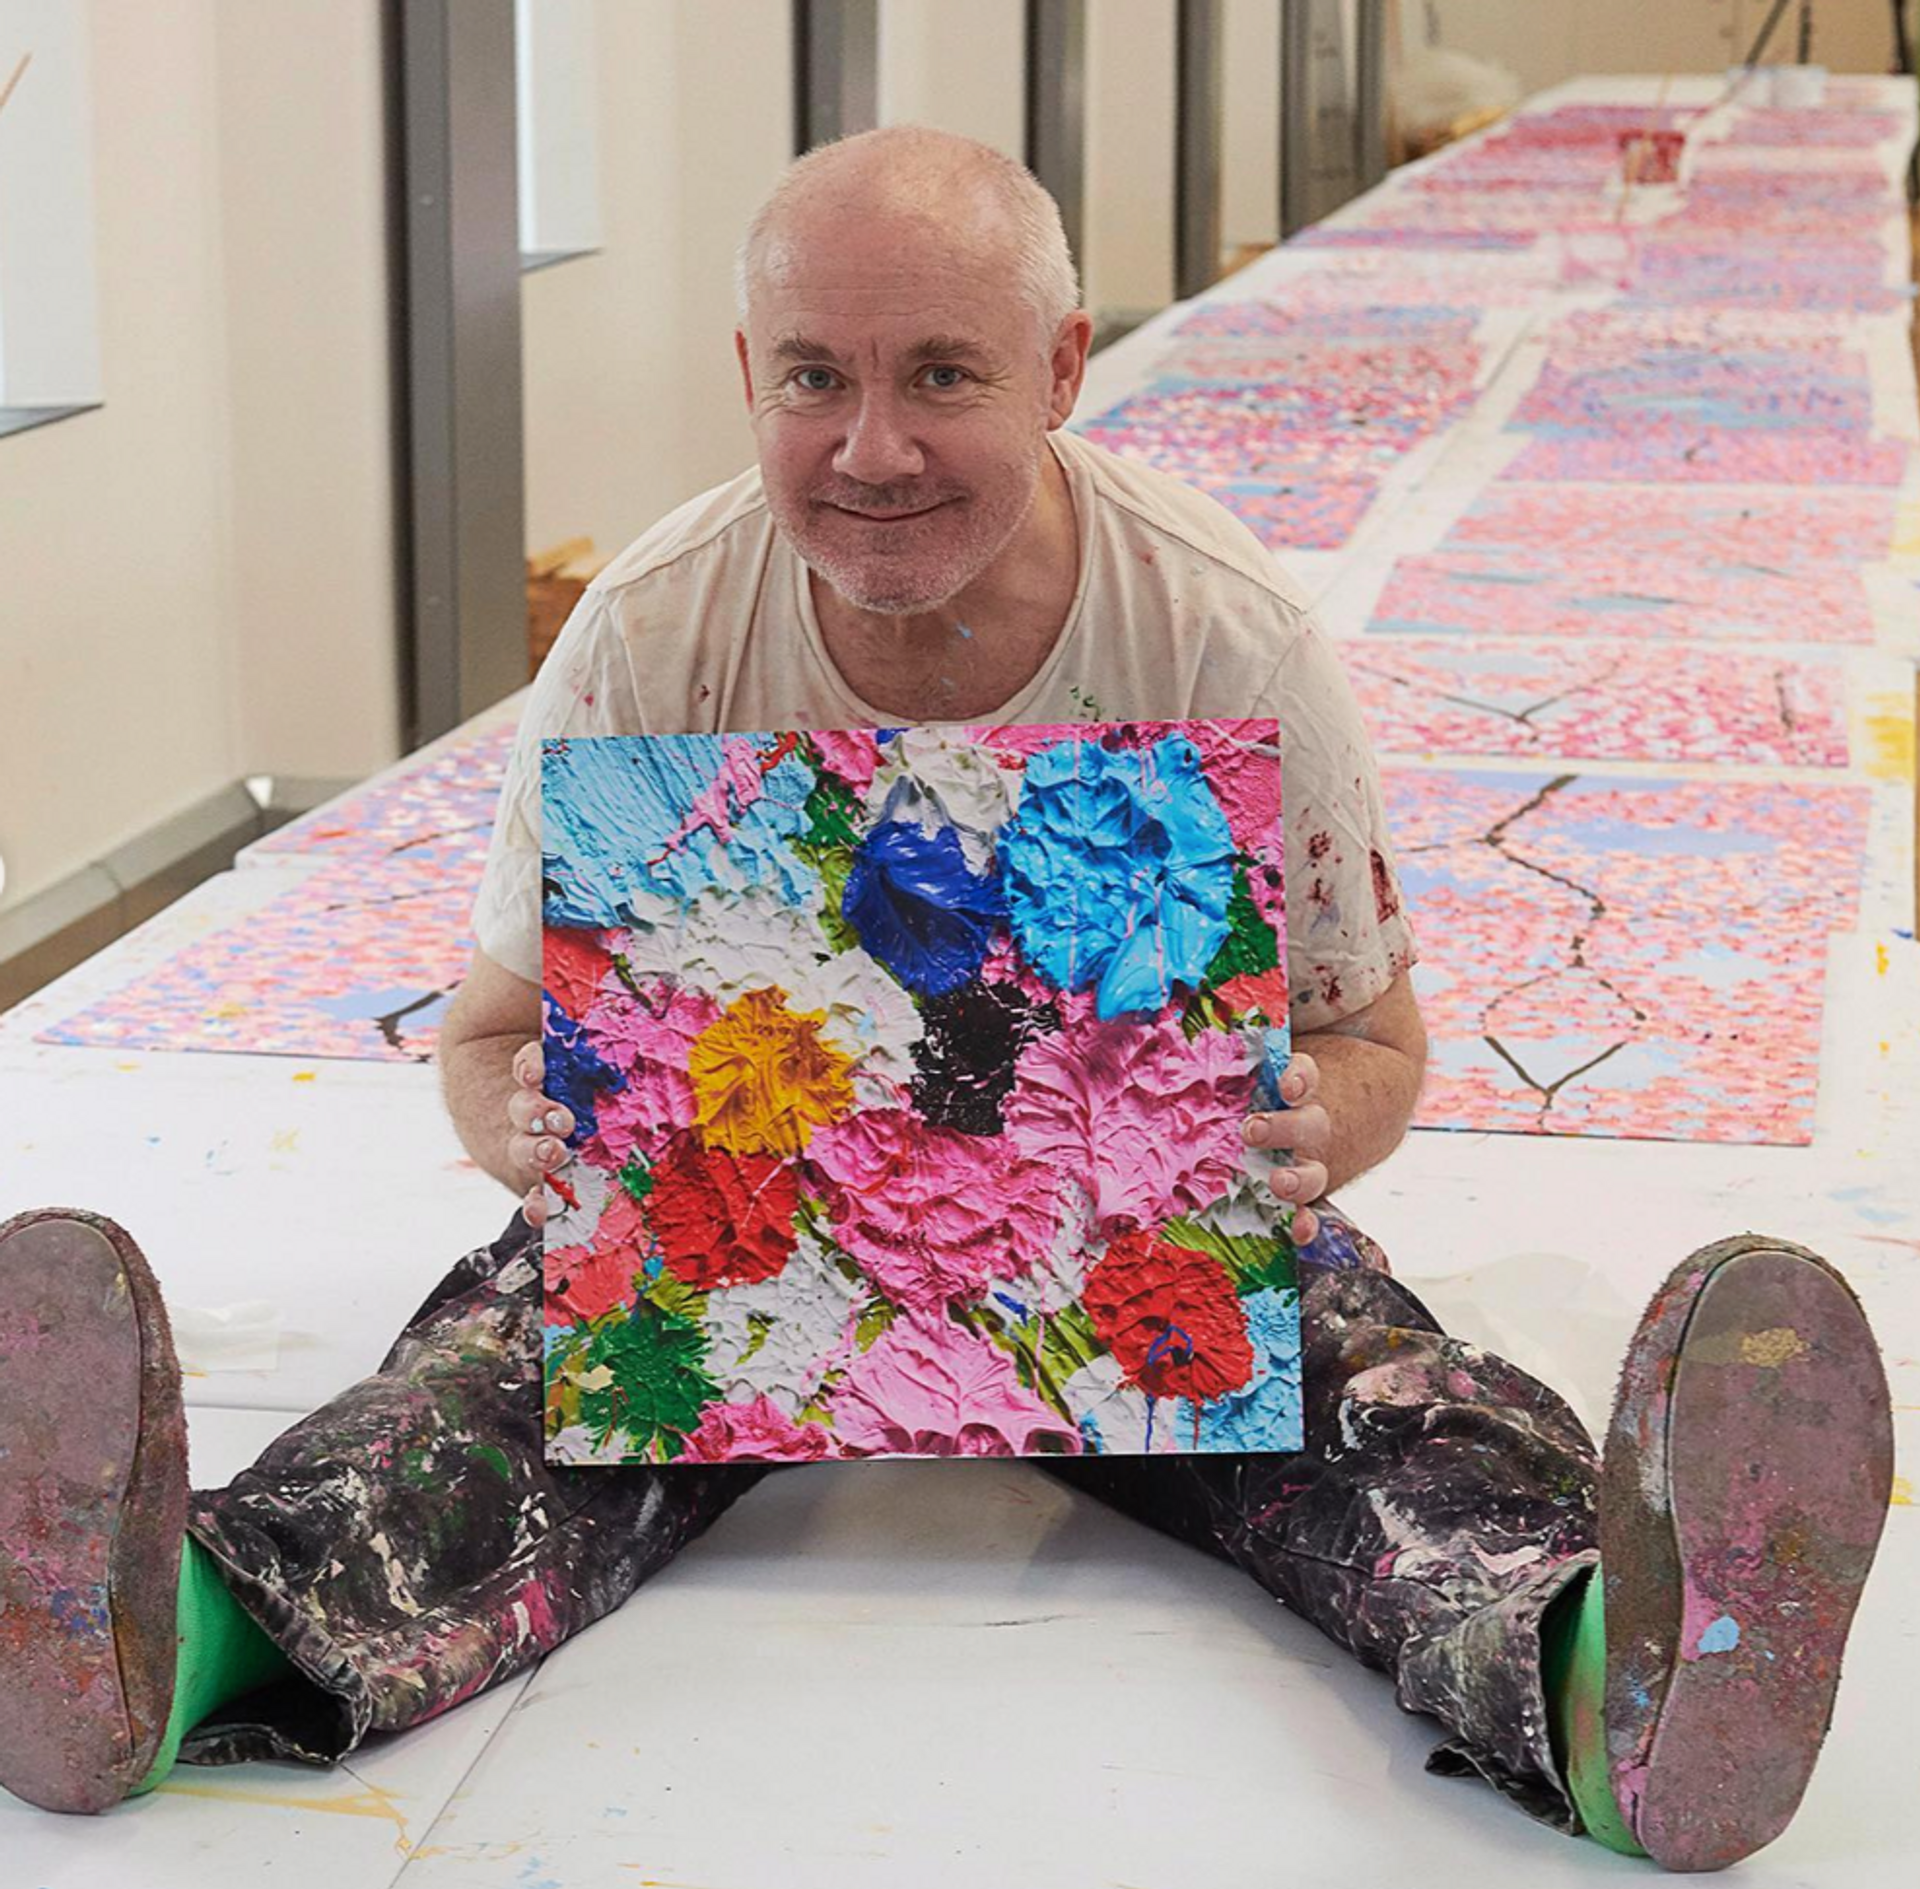 An image of the artist Damien Hirst, holding his work H8-1 Fruitful. In the background, his Cherry Blossom paintings can be seen.